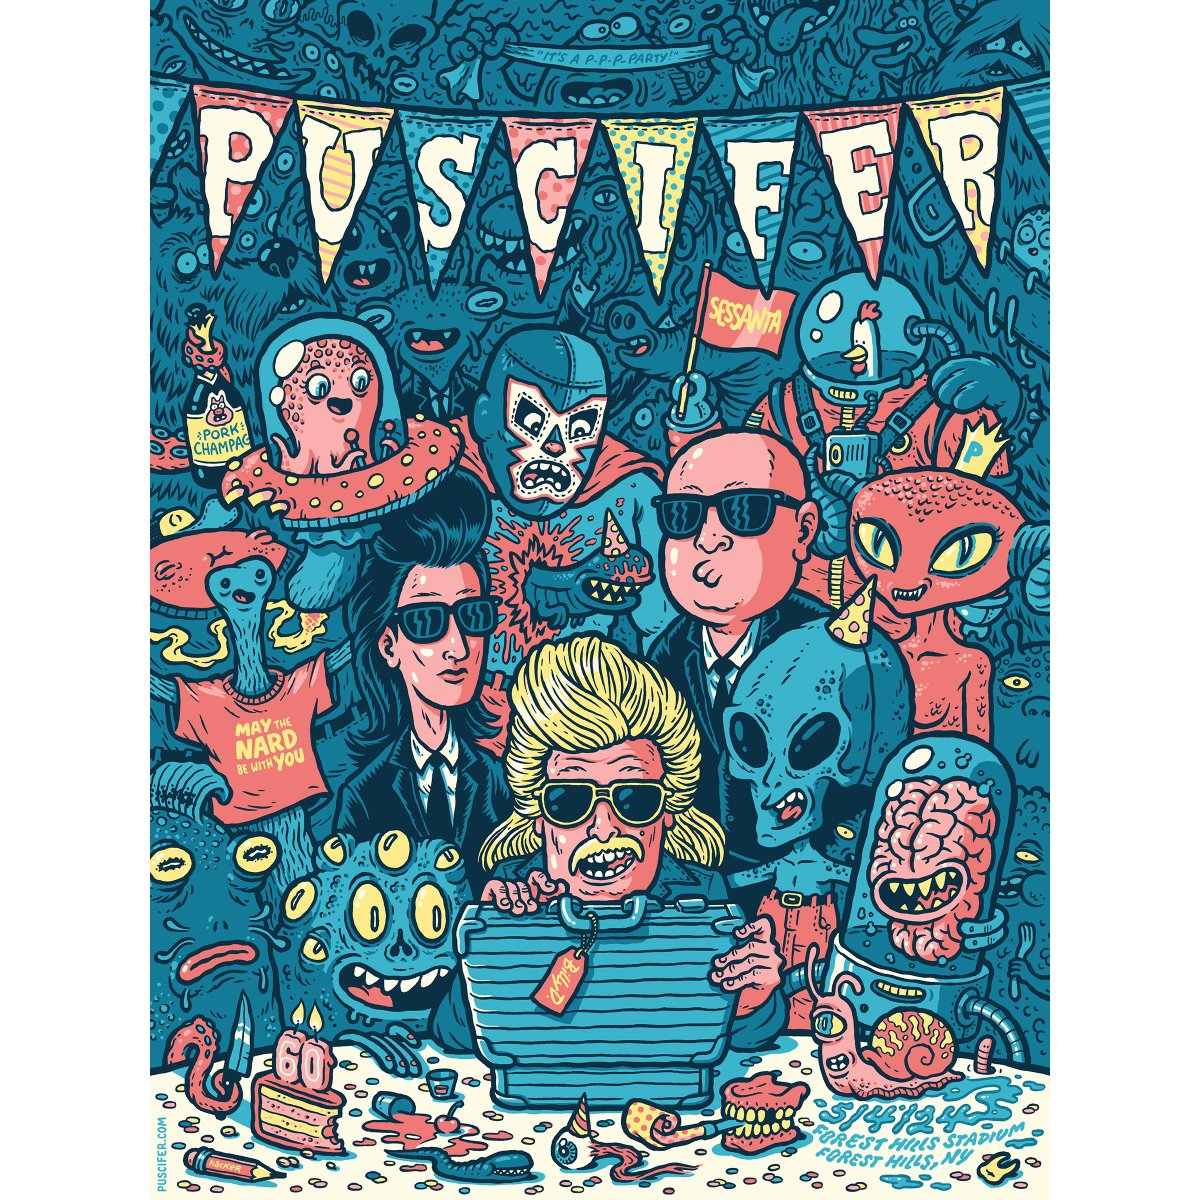 Our final Puscifer poster for Sessanta is for tonight's finale in New York. Designed by Michael Hacker, this is a limited edition of 200 regular 18”x 24” posters, and they will be available at the merch booth. Check out more of Michael Hacker’s work at michaelhacker.at.